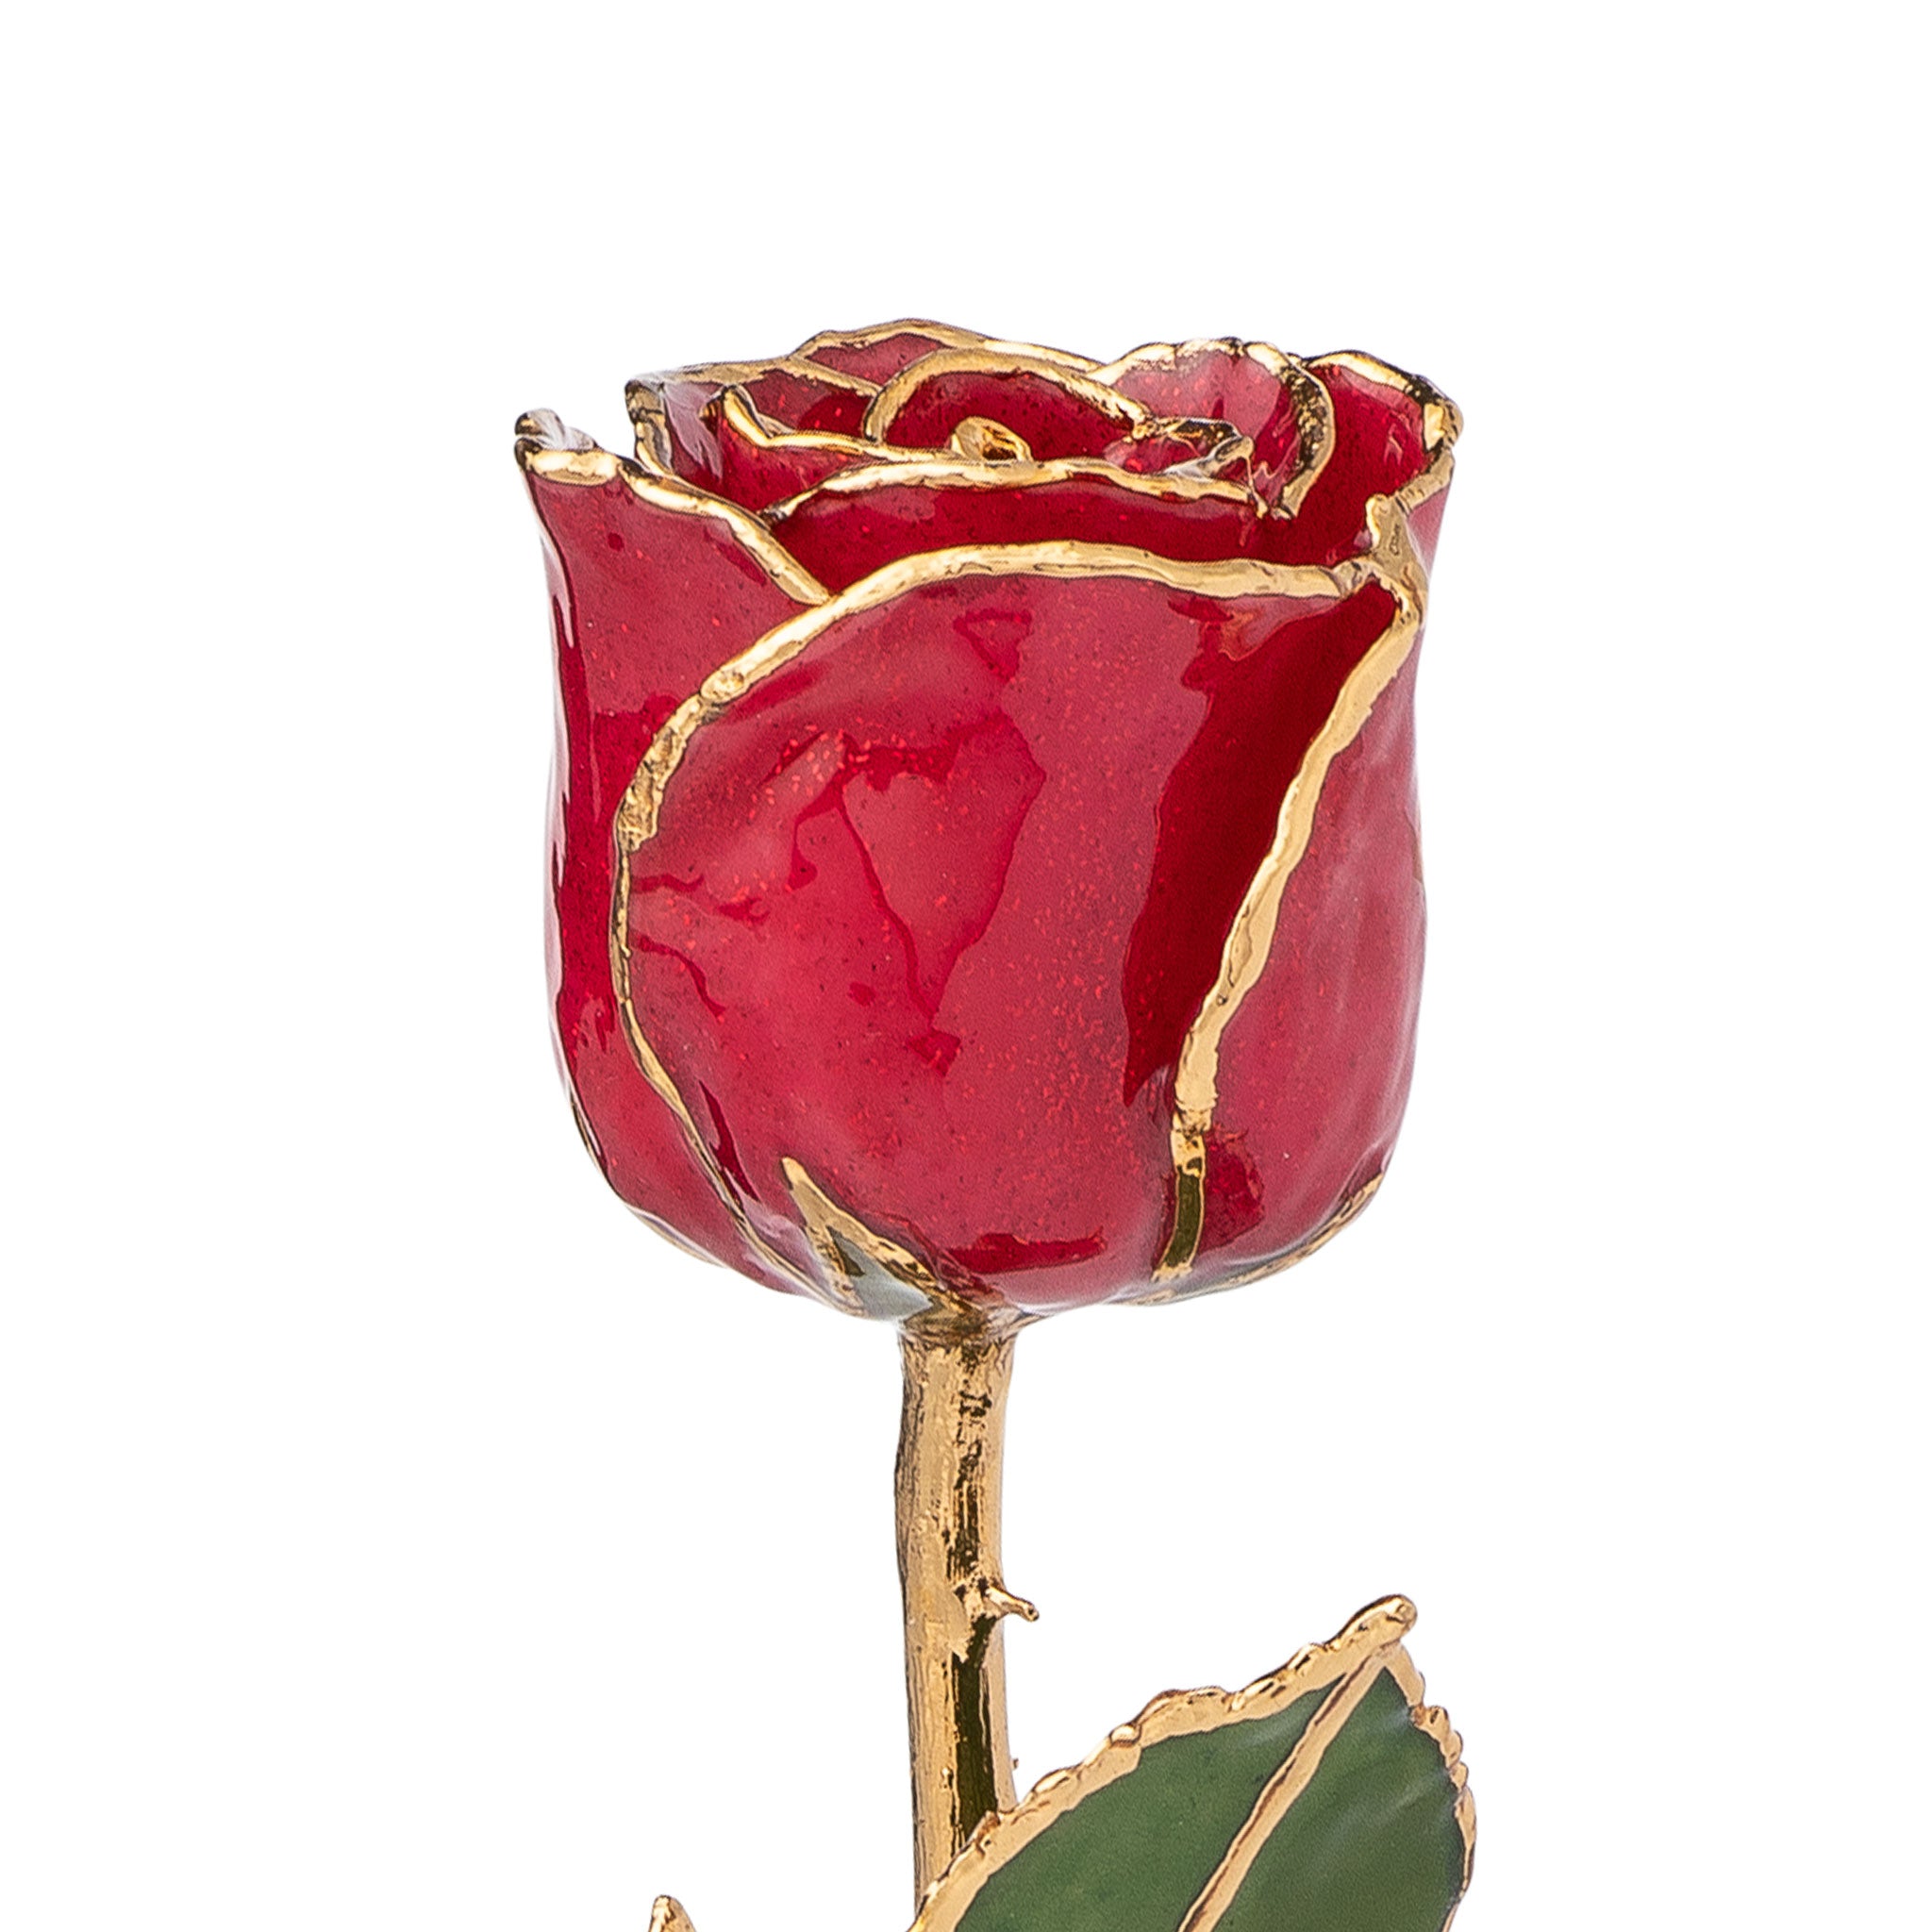 24K Gold Trimmed Forever Rose with Red Petals with Suspended Sparkles. View of Stem, Leaves, and Rose Petals and Showing Detail of Gold Trim